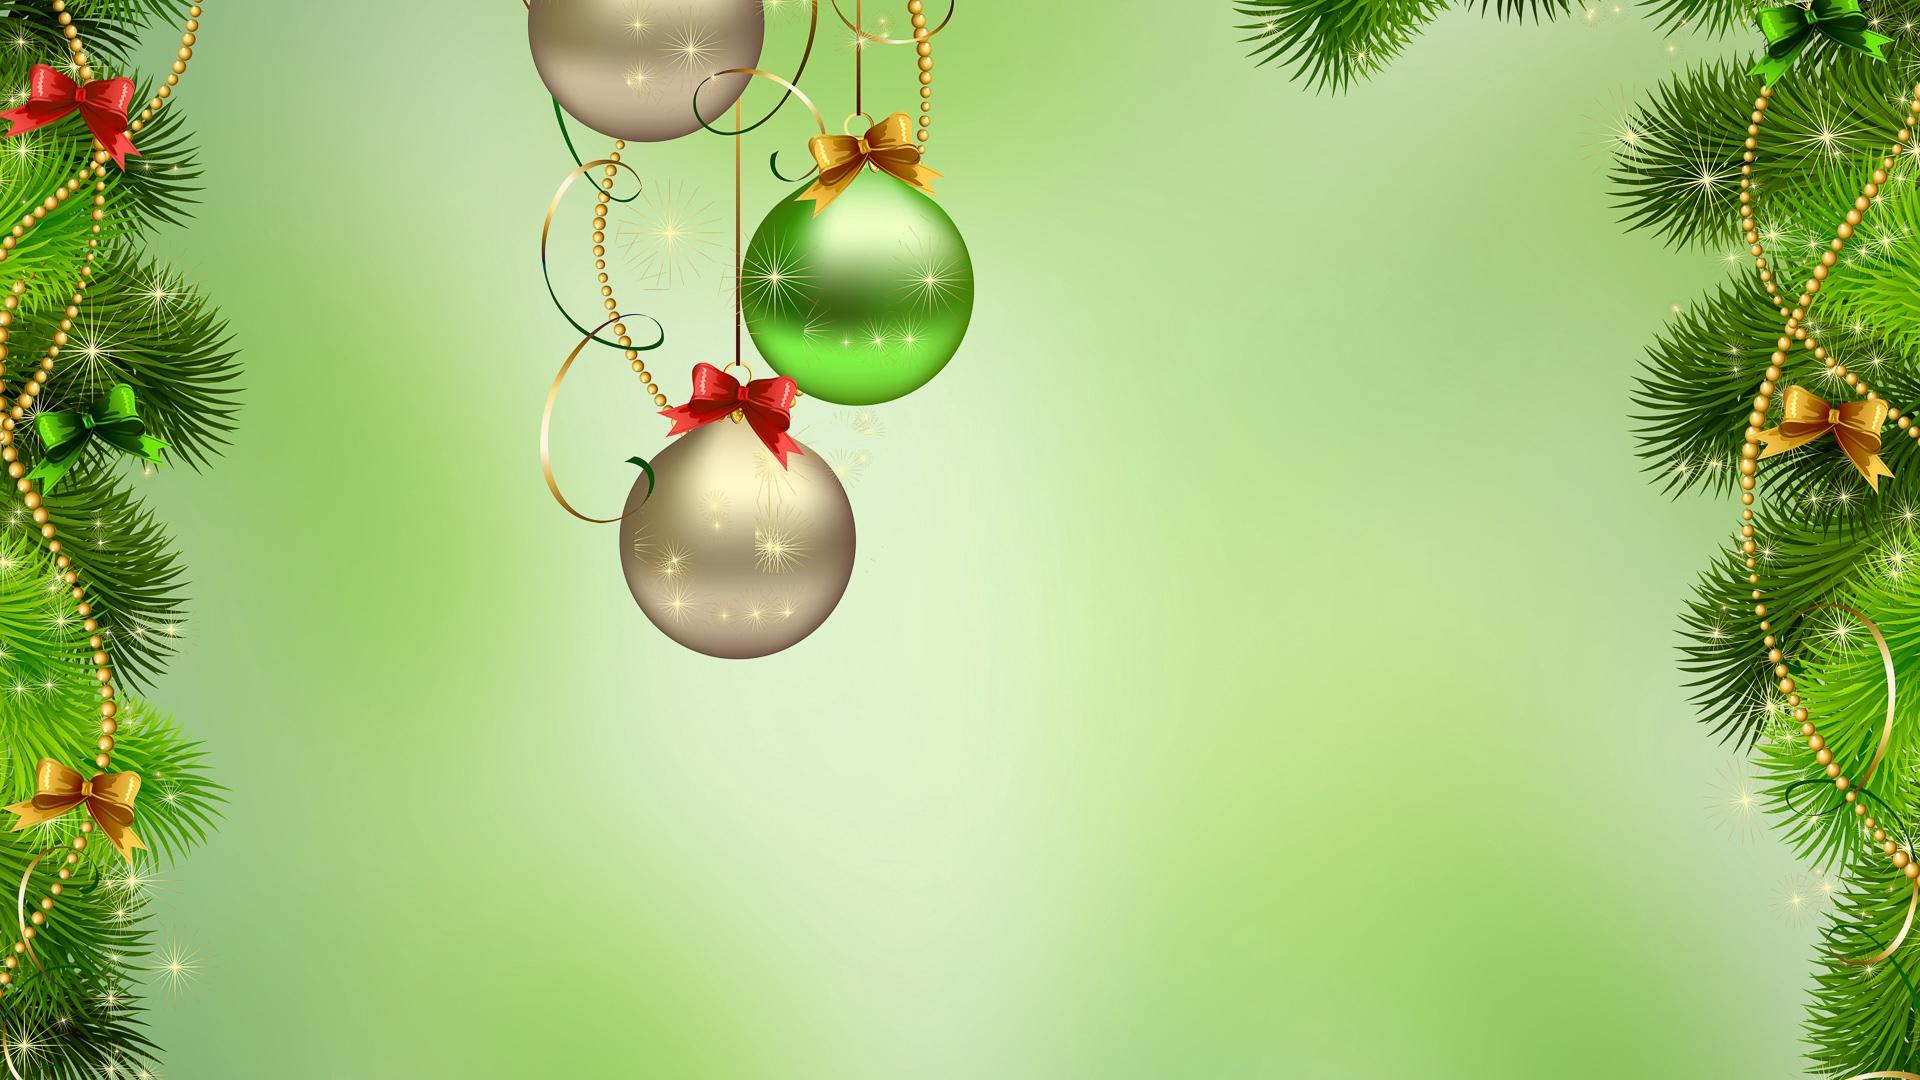 Download wallpaper 1920x1080 christmas ornament, new year